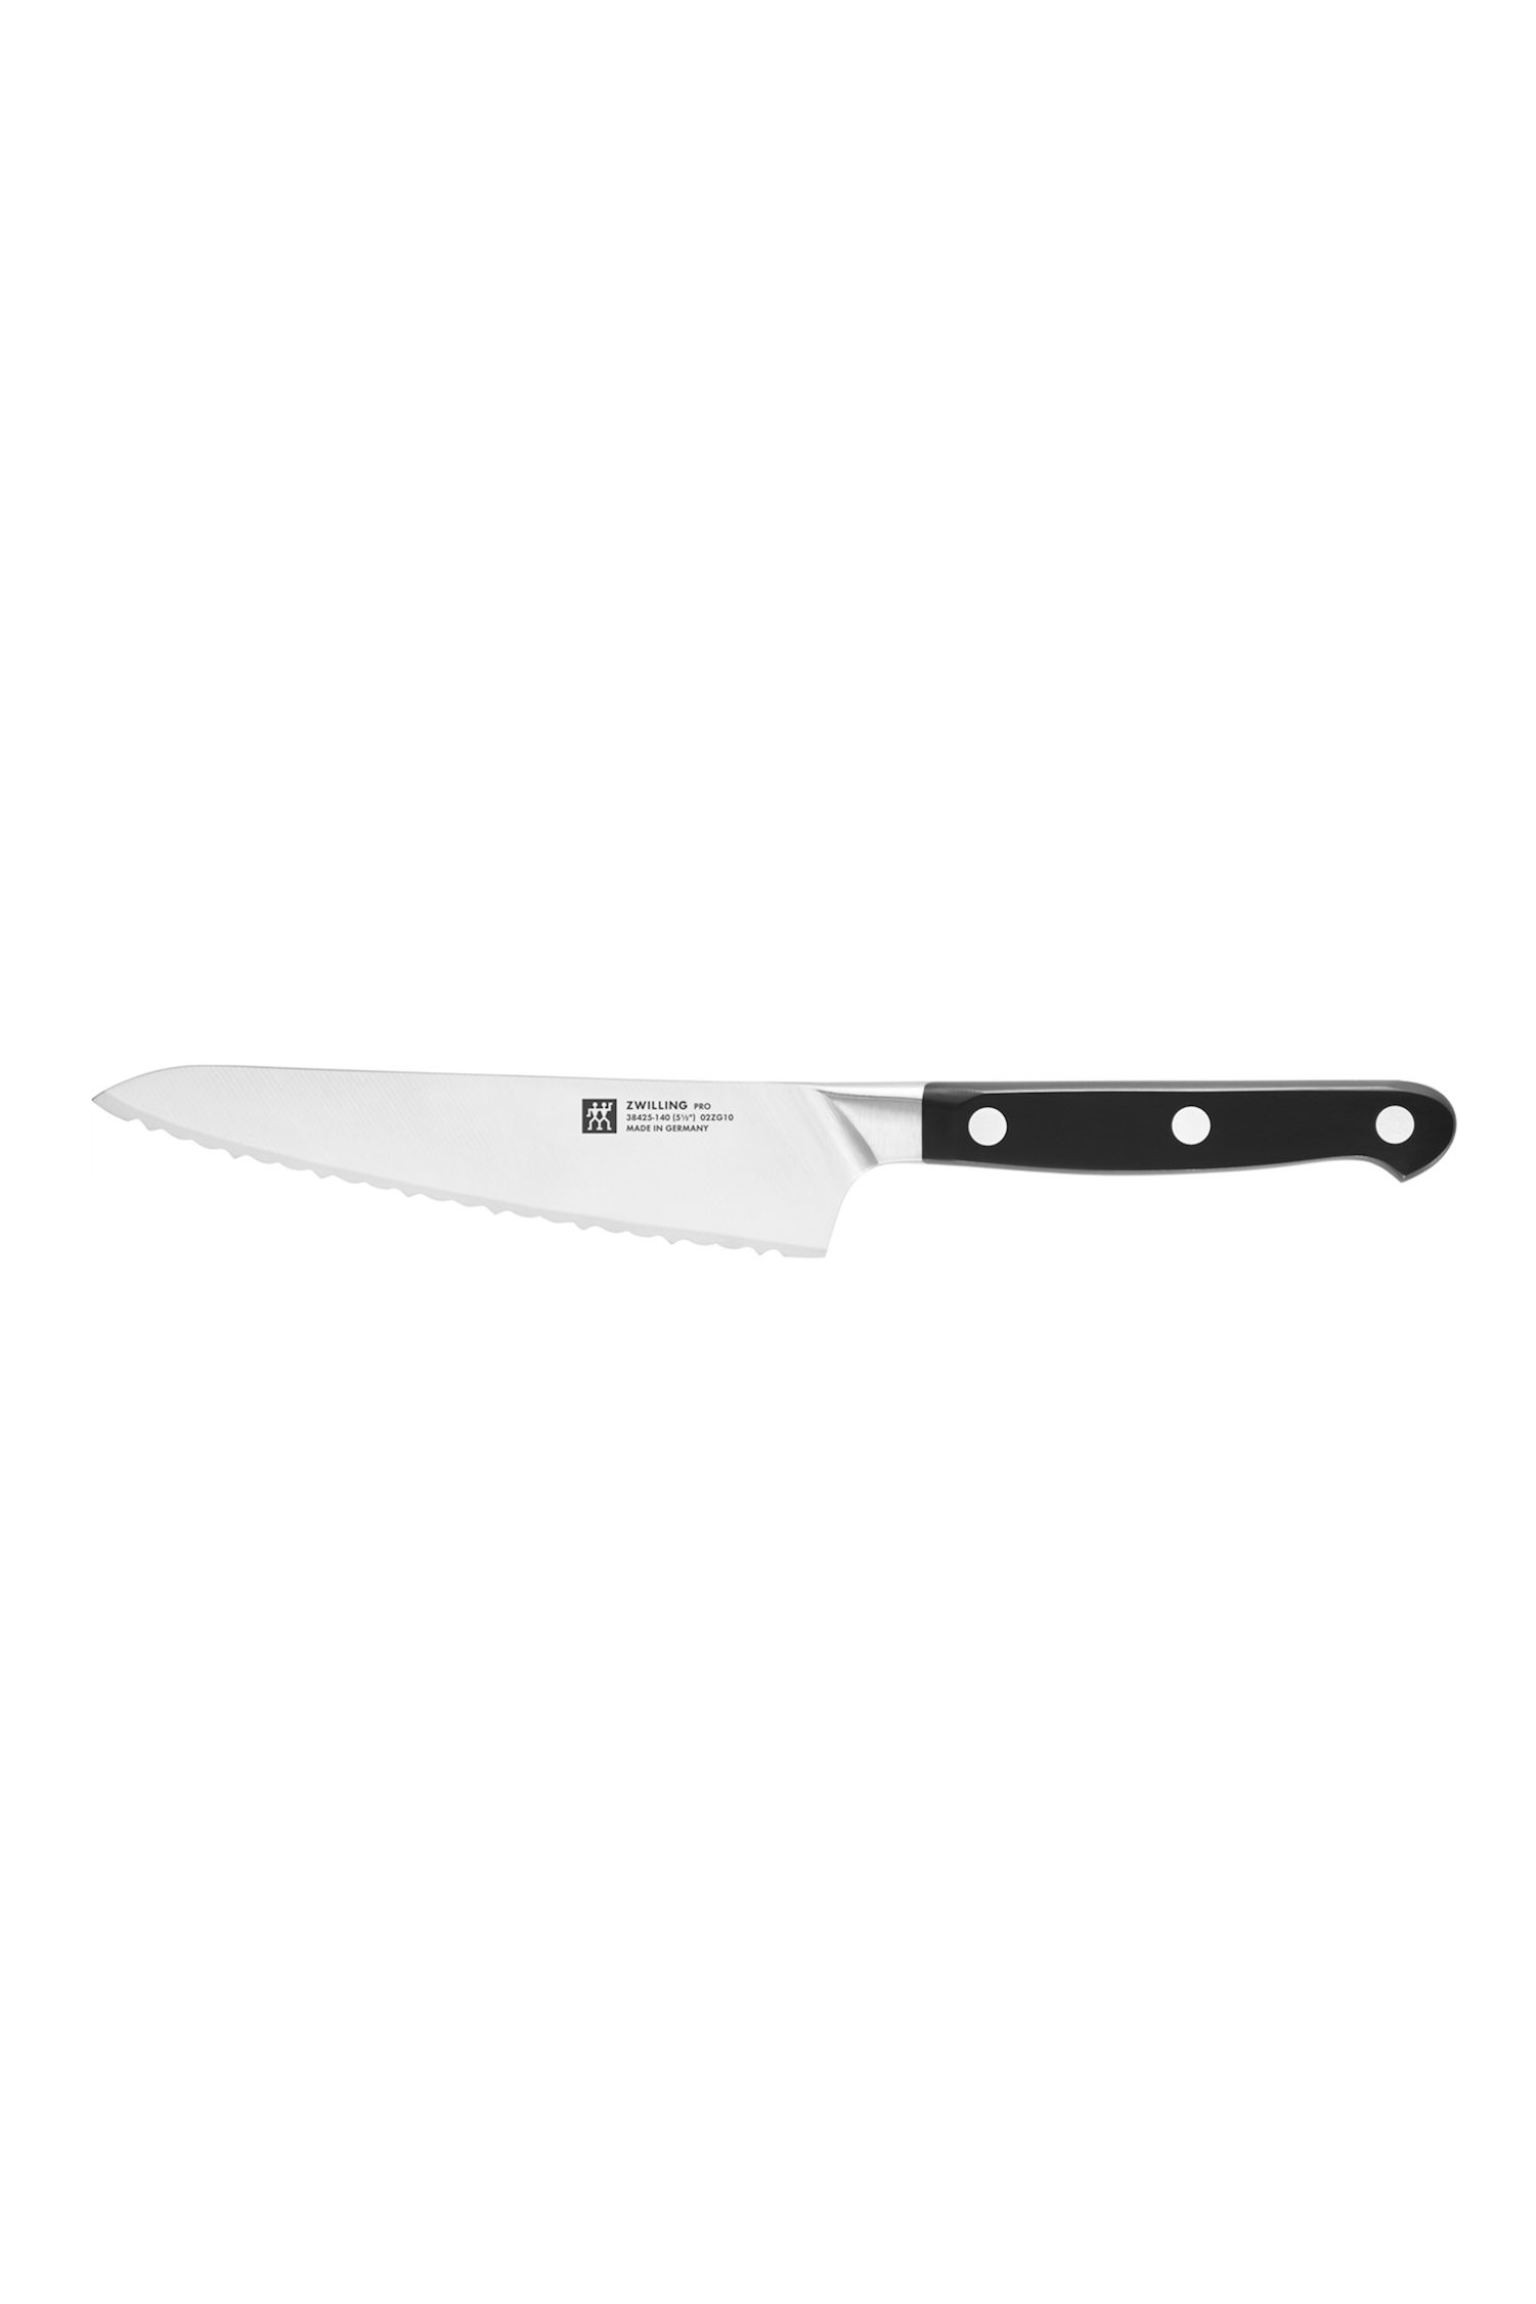 ZWILLING Chef's Knife Pro 14 Cm Compact Serrated - Silver / Basic Black 1218714001 | 1218714001